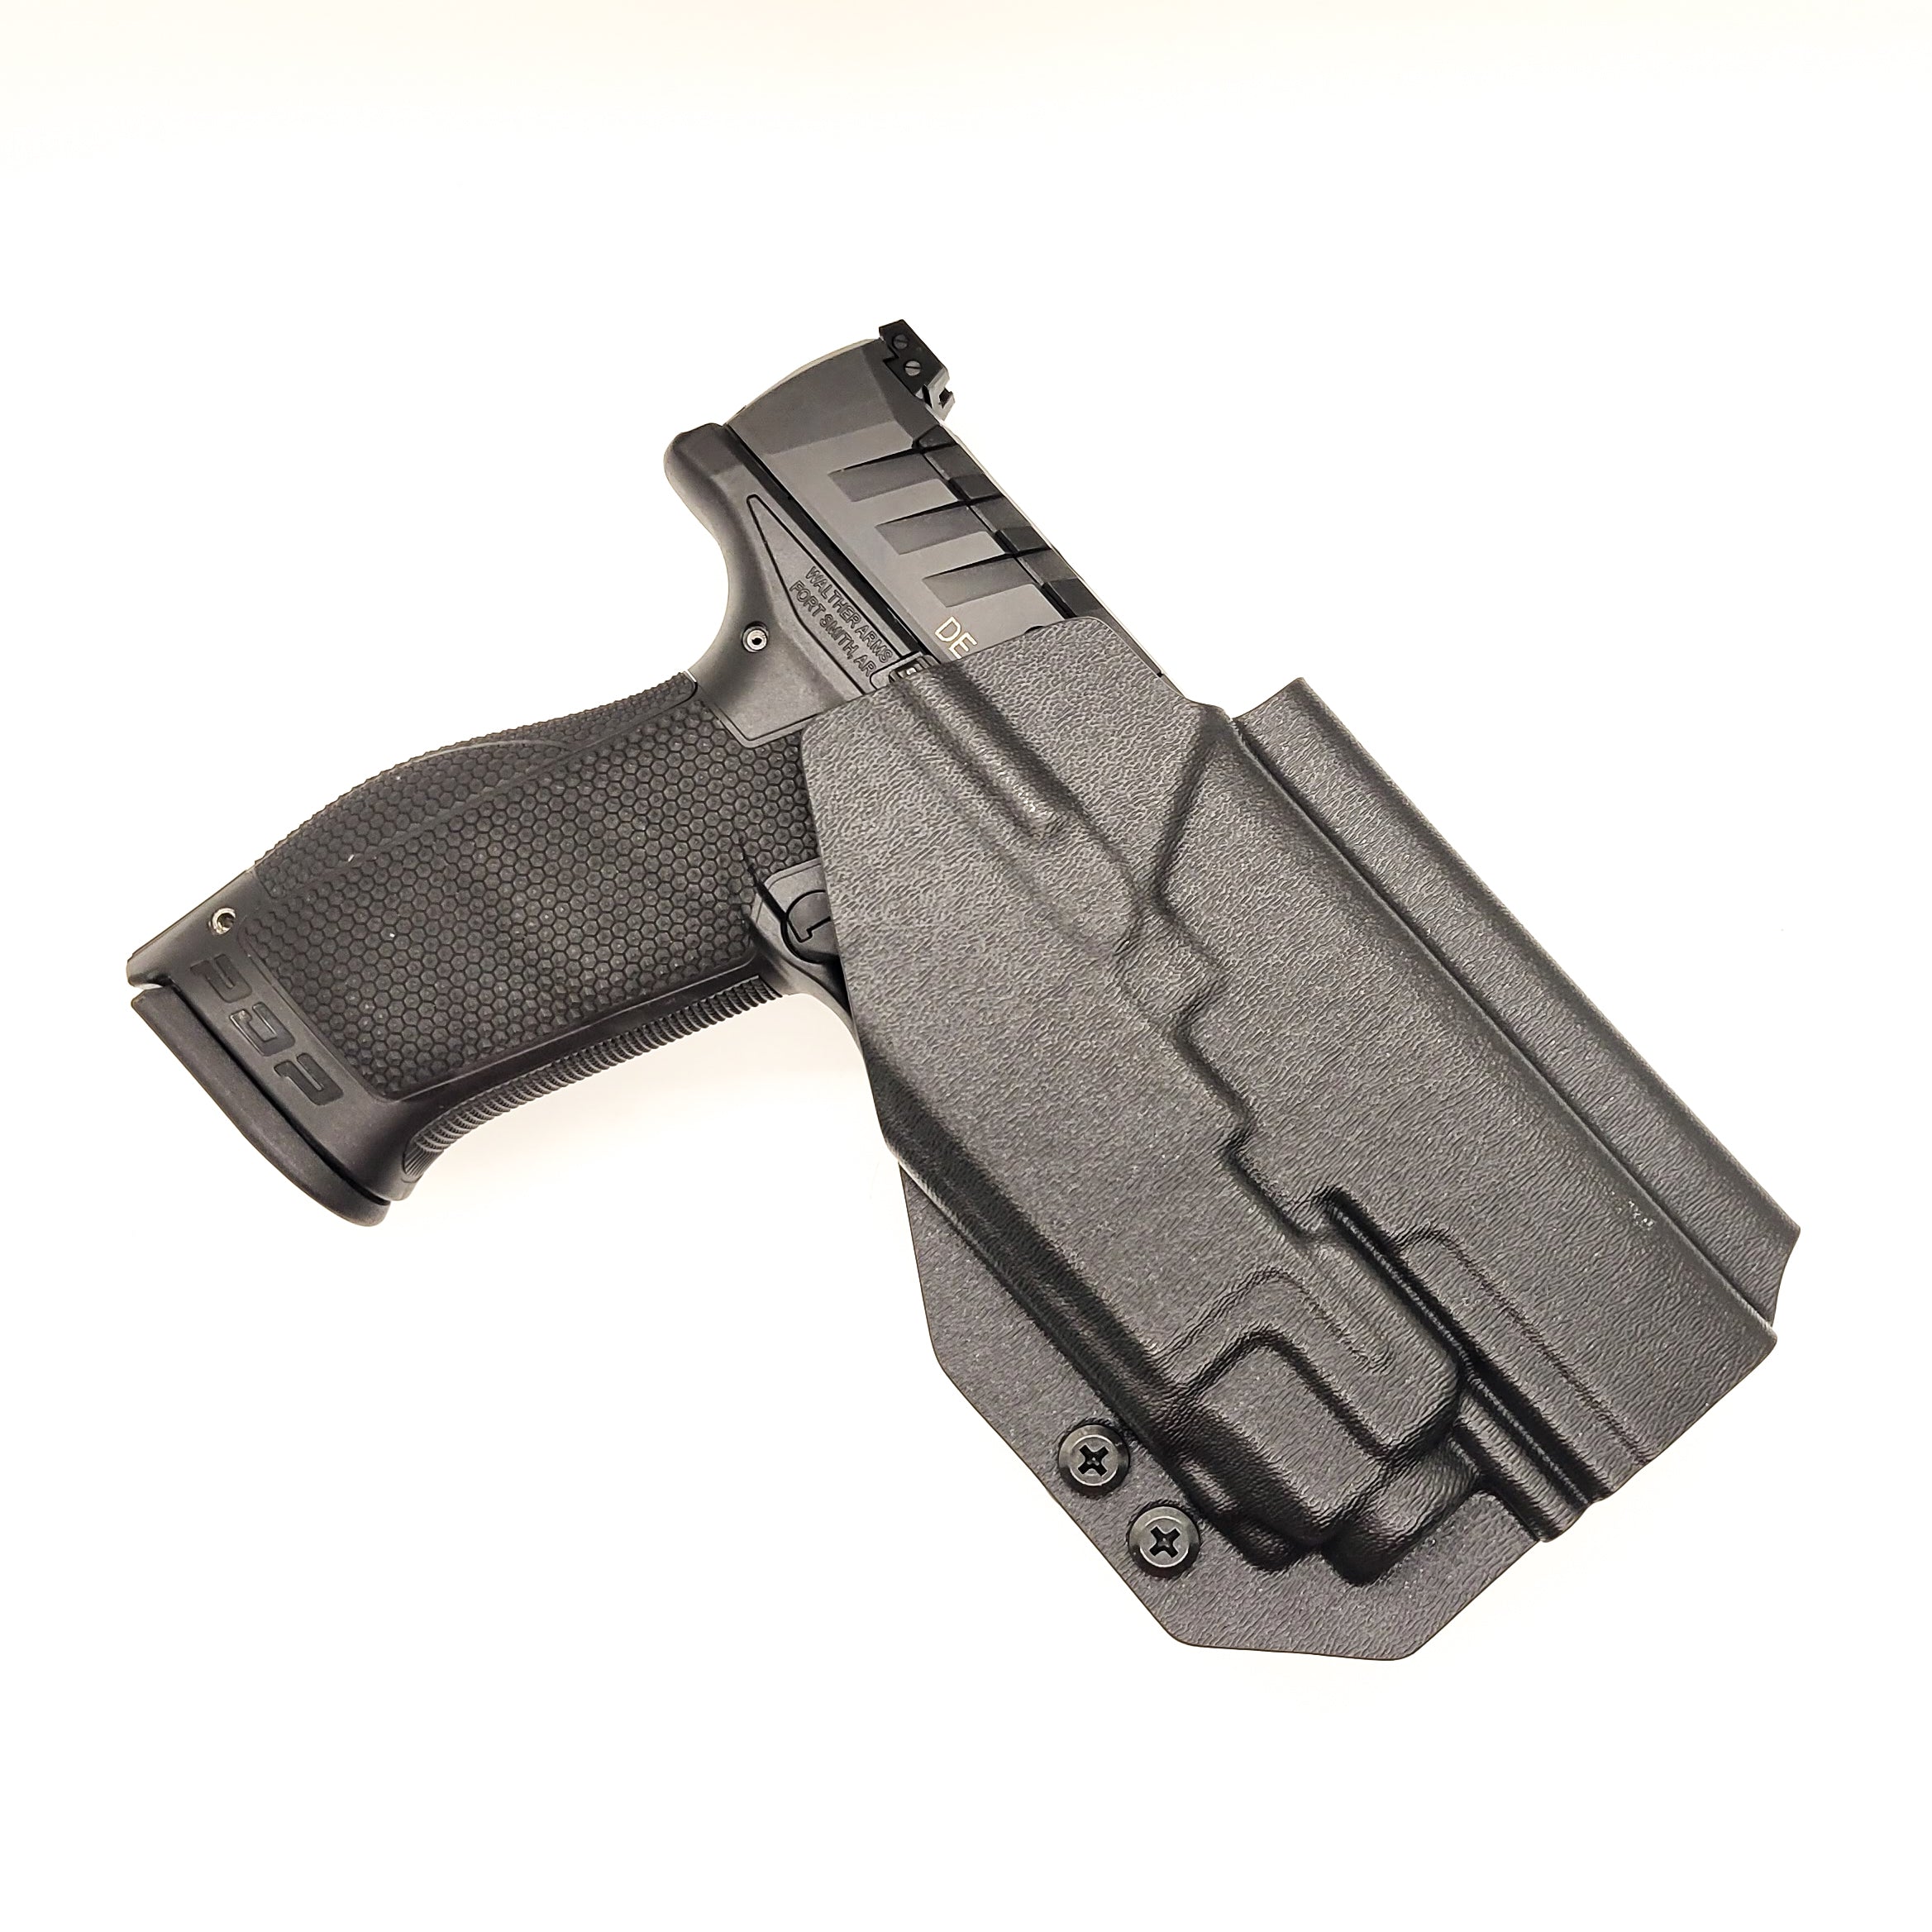 For the best Outside Waistband Taco Style Holster designed to fit the Walther PDP Pro SD Compact 4.6" pistol with a 4" slide and 4.6" threaded barrel with the Streamlight TLR-8 or TLR-8A mounted on the firearm, shop Four Brothers Holsters. Cut for red dot sight, full sweat guard, adjustable retention & open muzzle. 